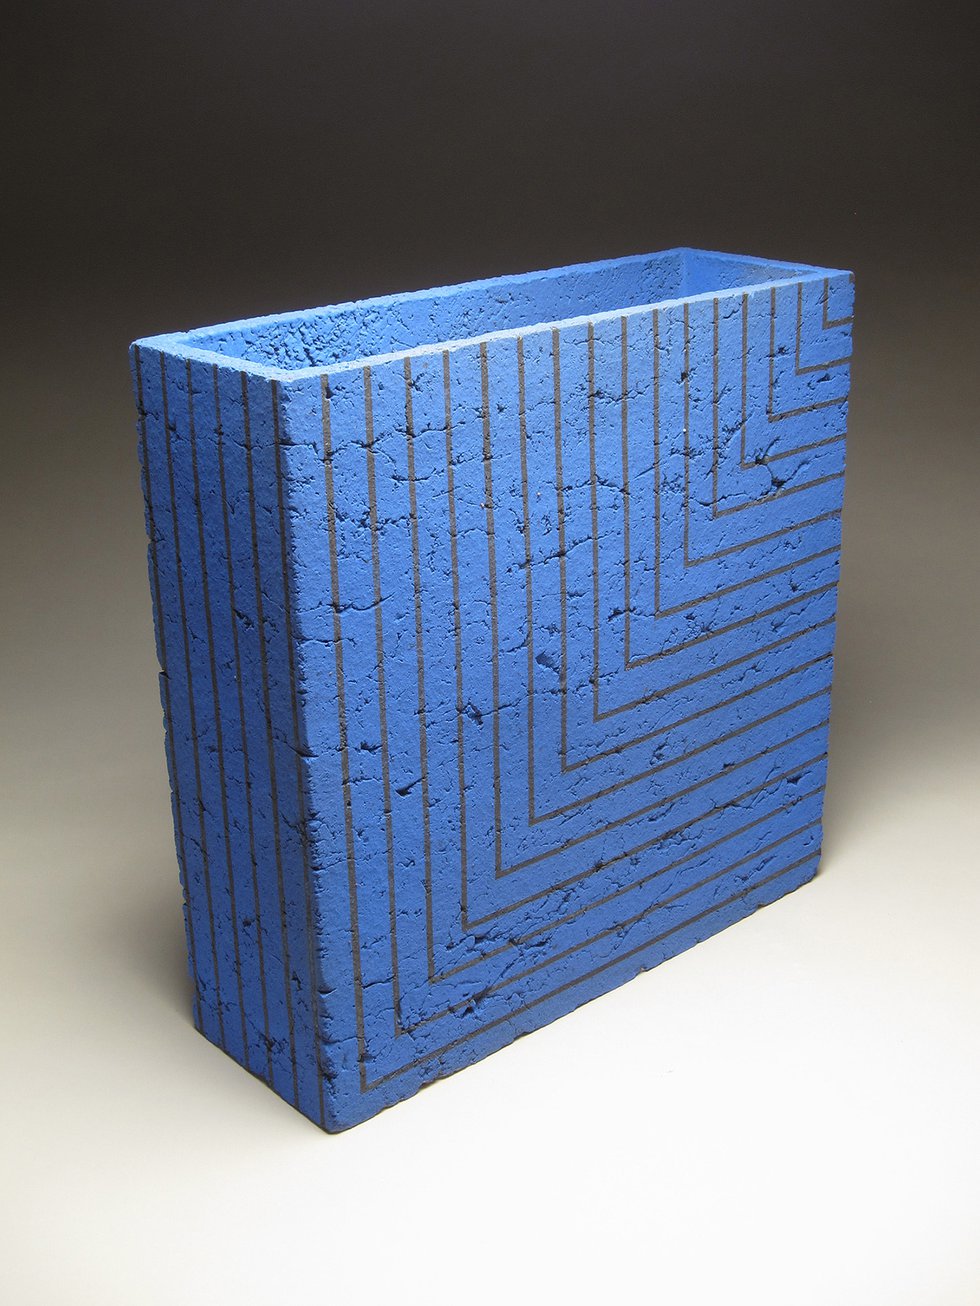 Zane Wilcox, "Section 3",reduction fired stoneware Dimensions: 18 x 18 x 6 in.